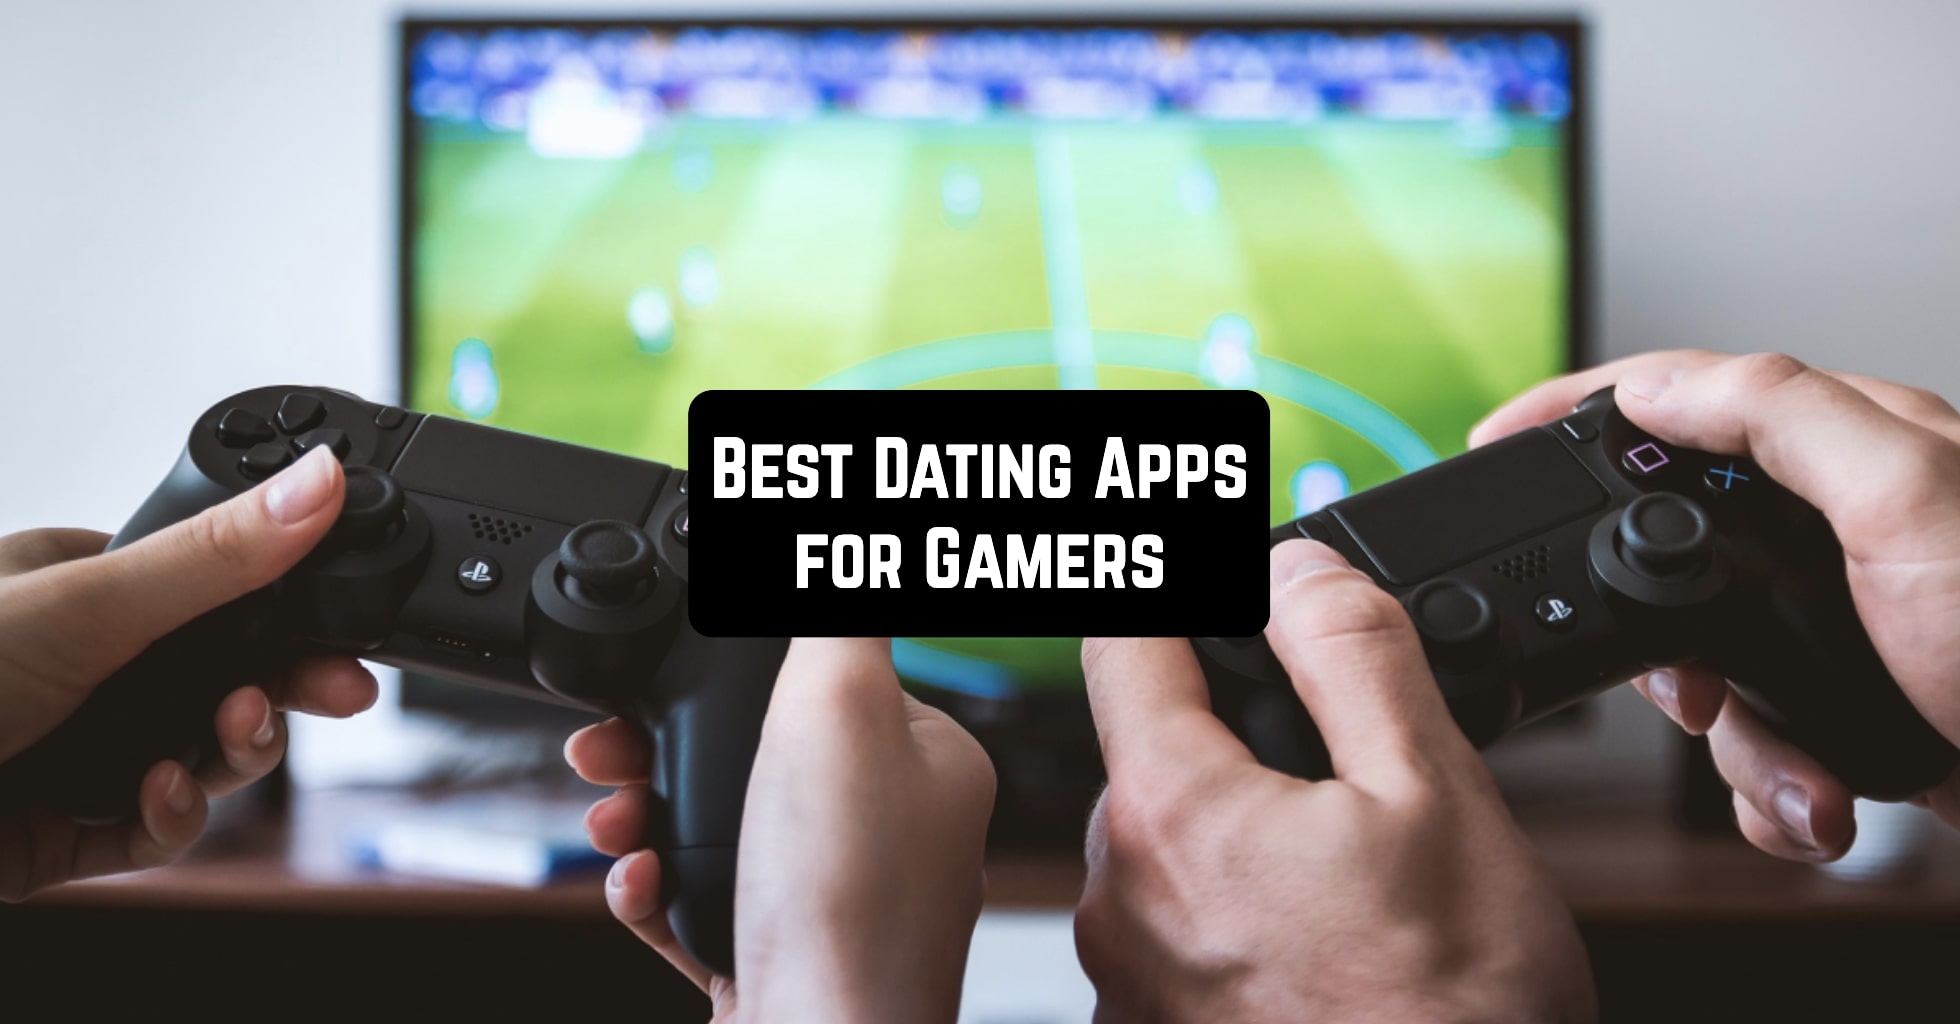 Best Dating Apps for Gamers